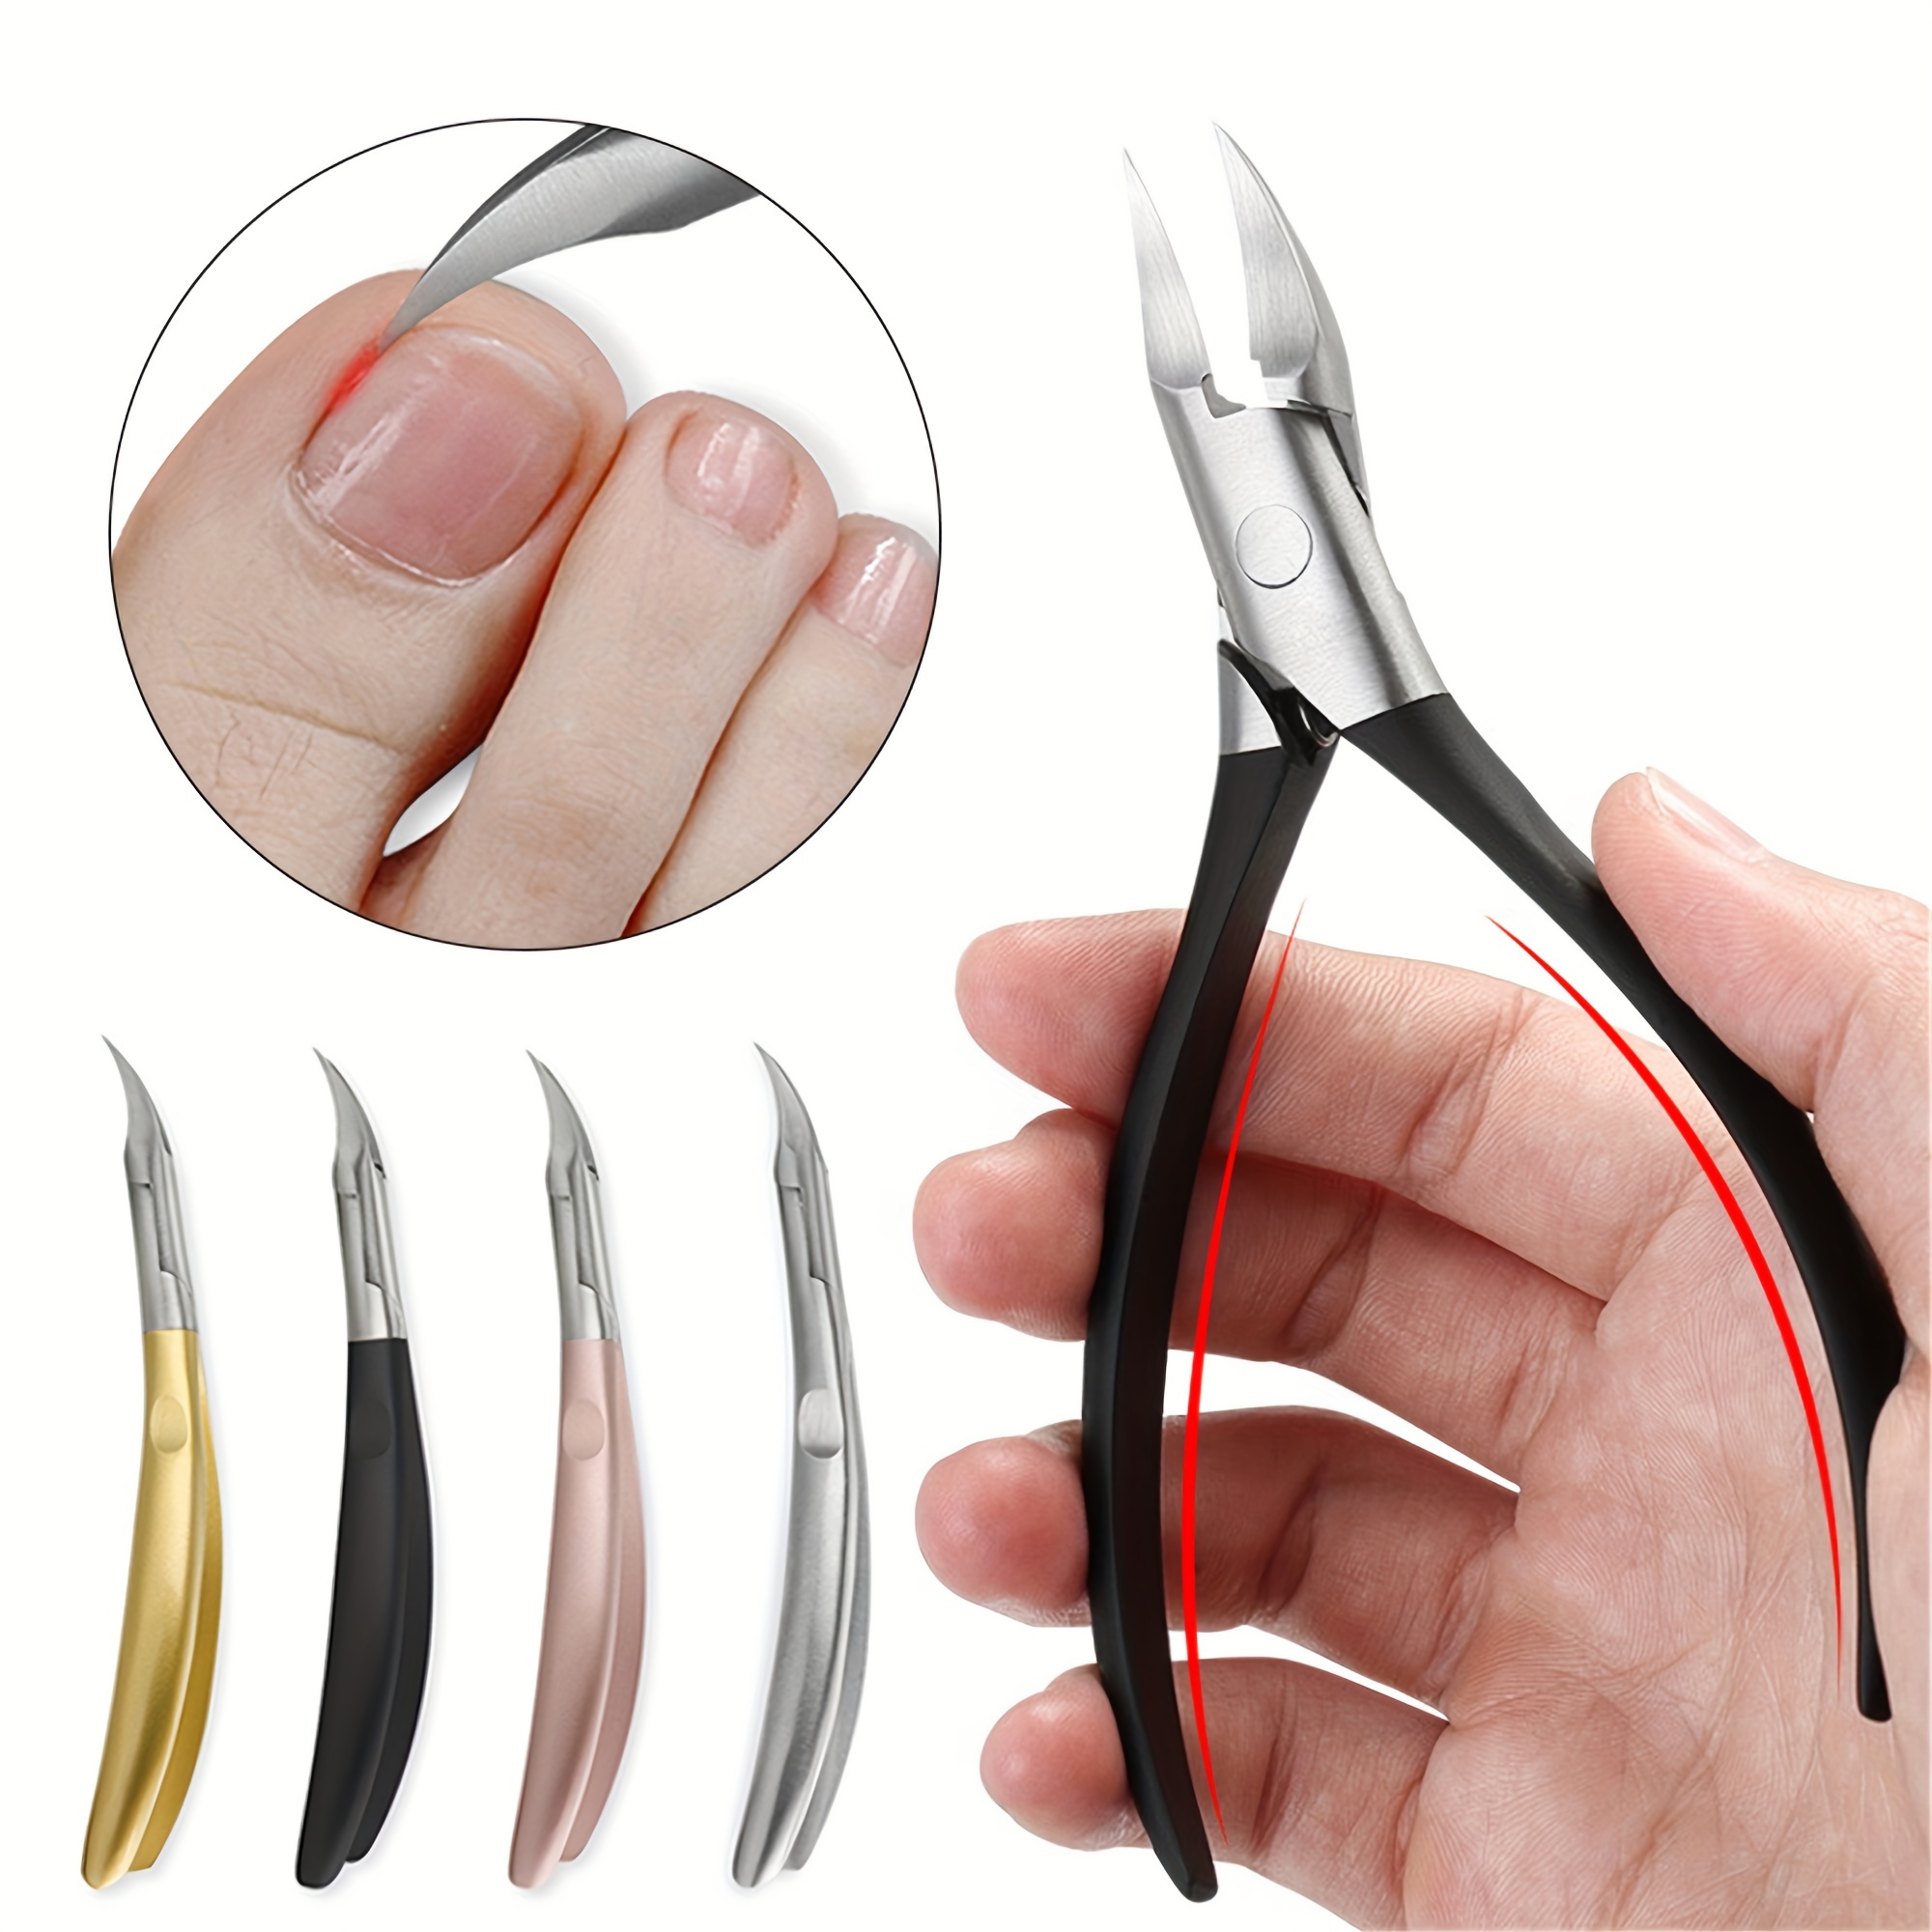 

Nail Scissors Plier Stainless Steel Cuticle Nipper Dead Skin Remover Toenail Clipper Manicure Tools